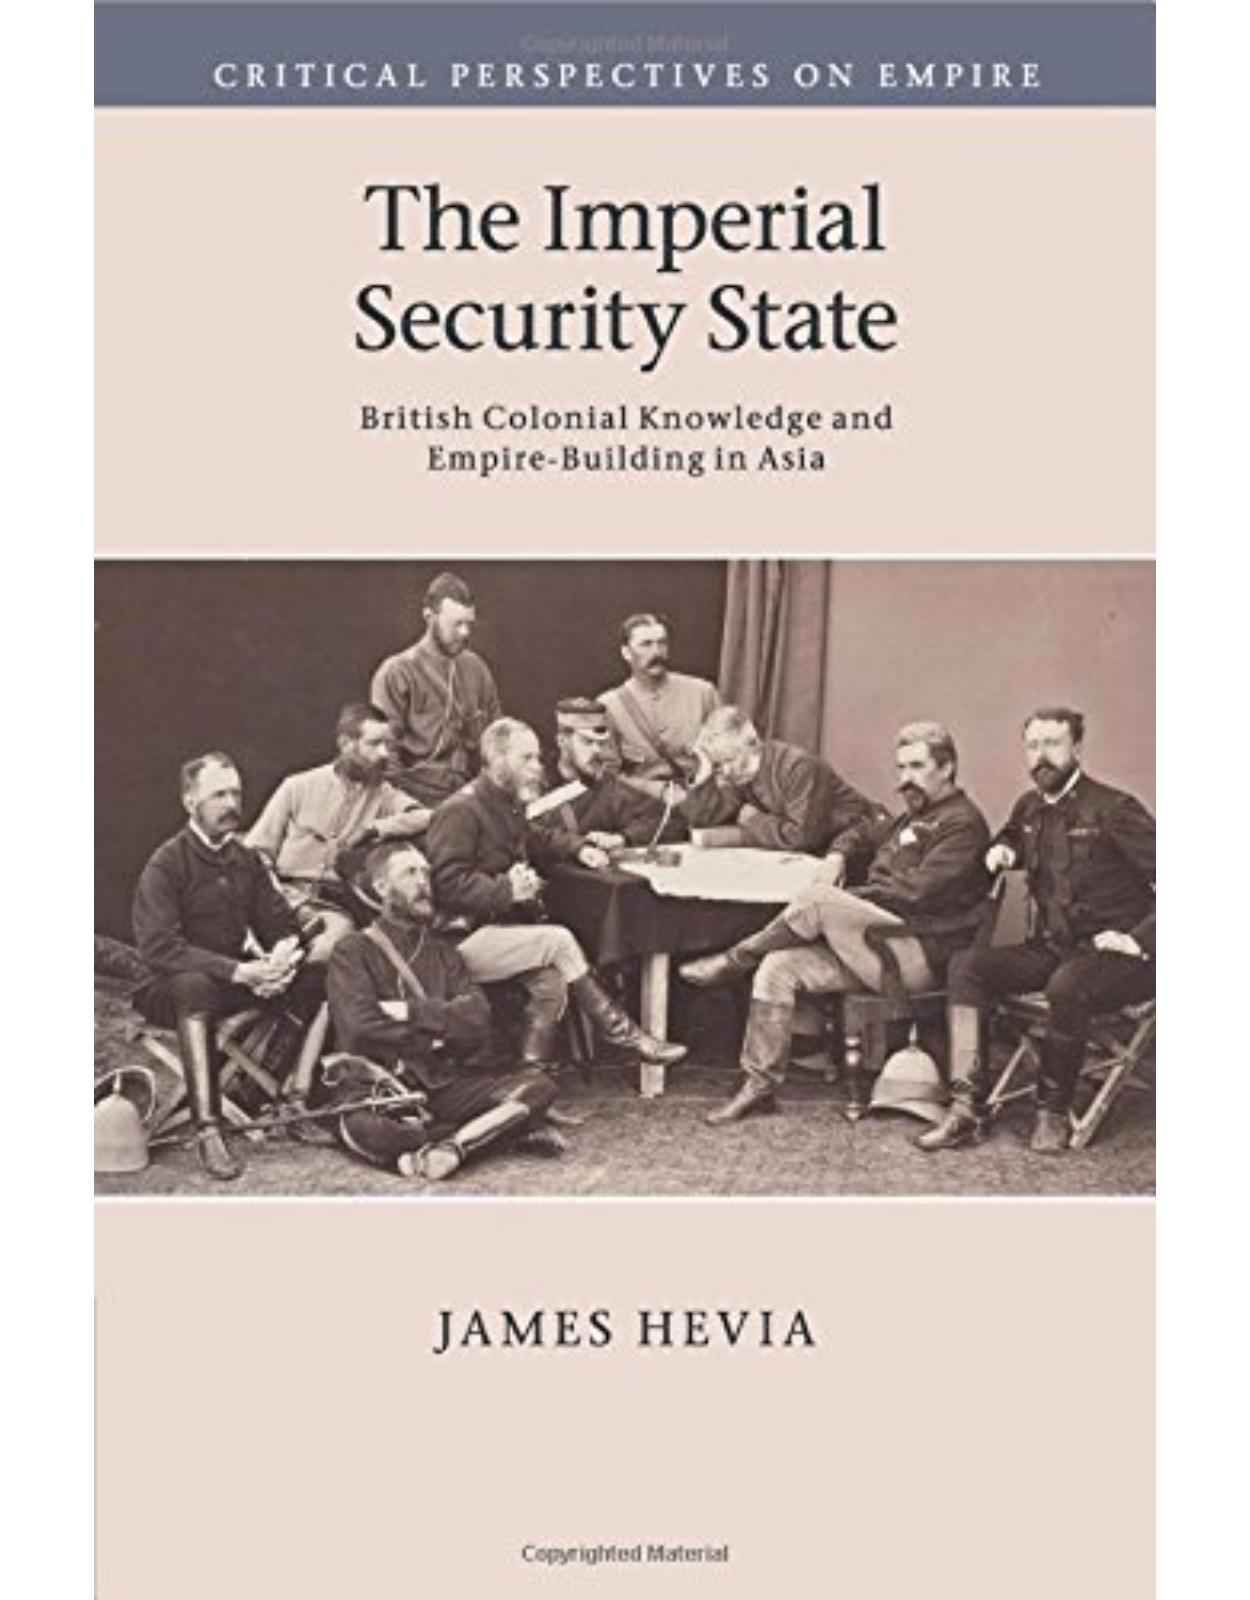 The Imperial Security State: British Colonial Knowledge and Empire-Building in Asia (Critical Perspectives on Empire)